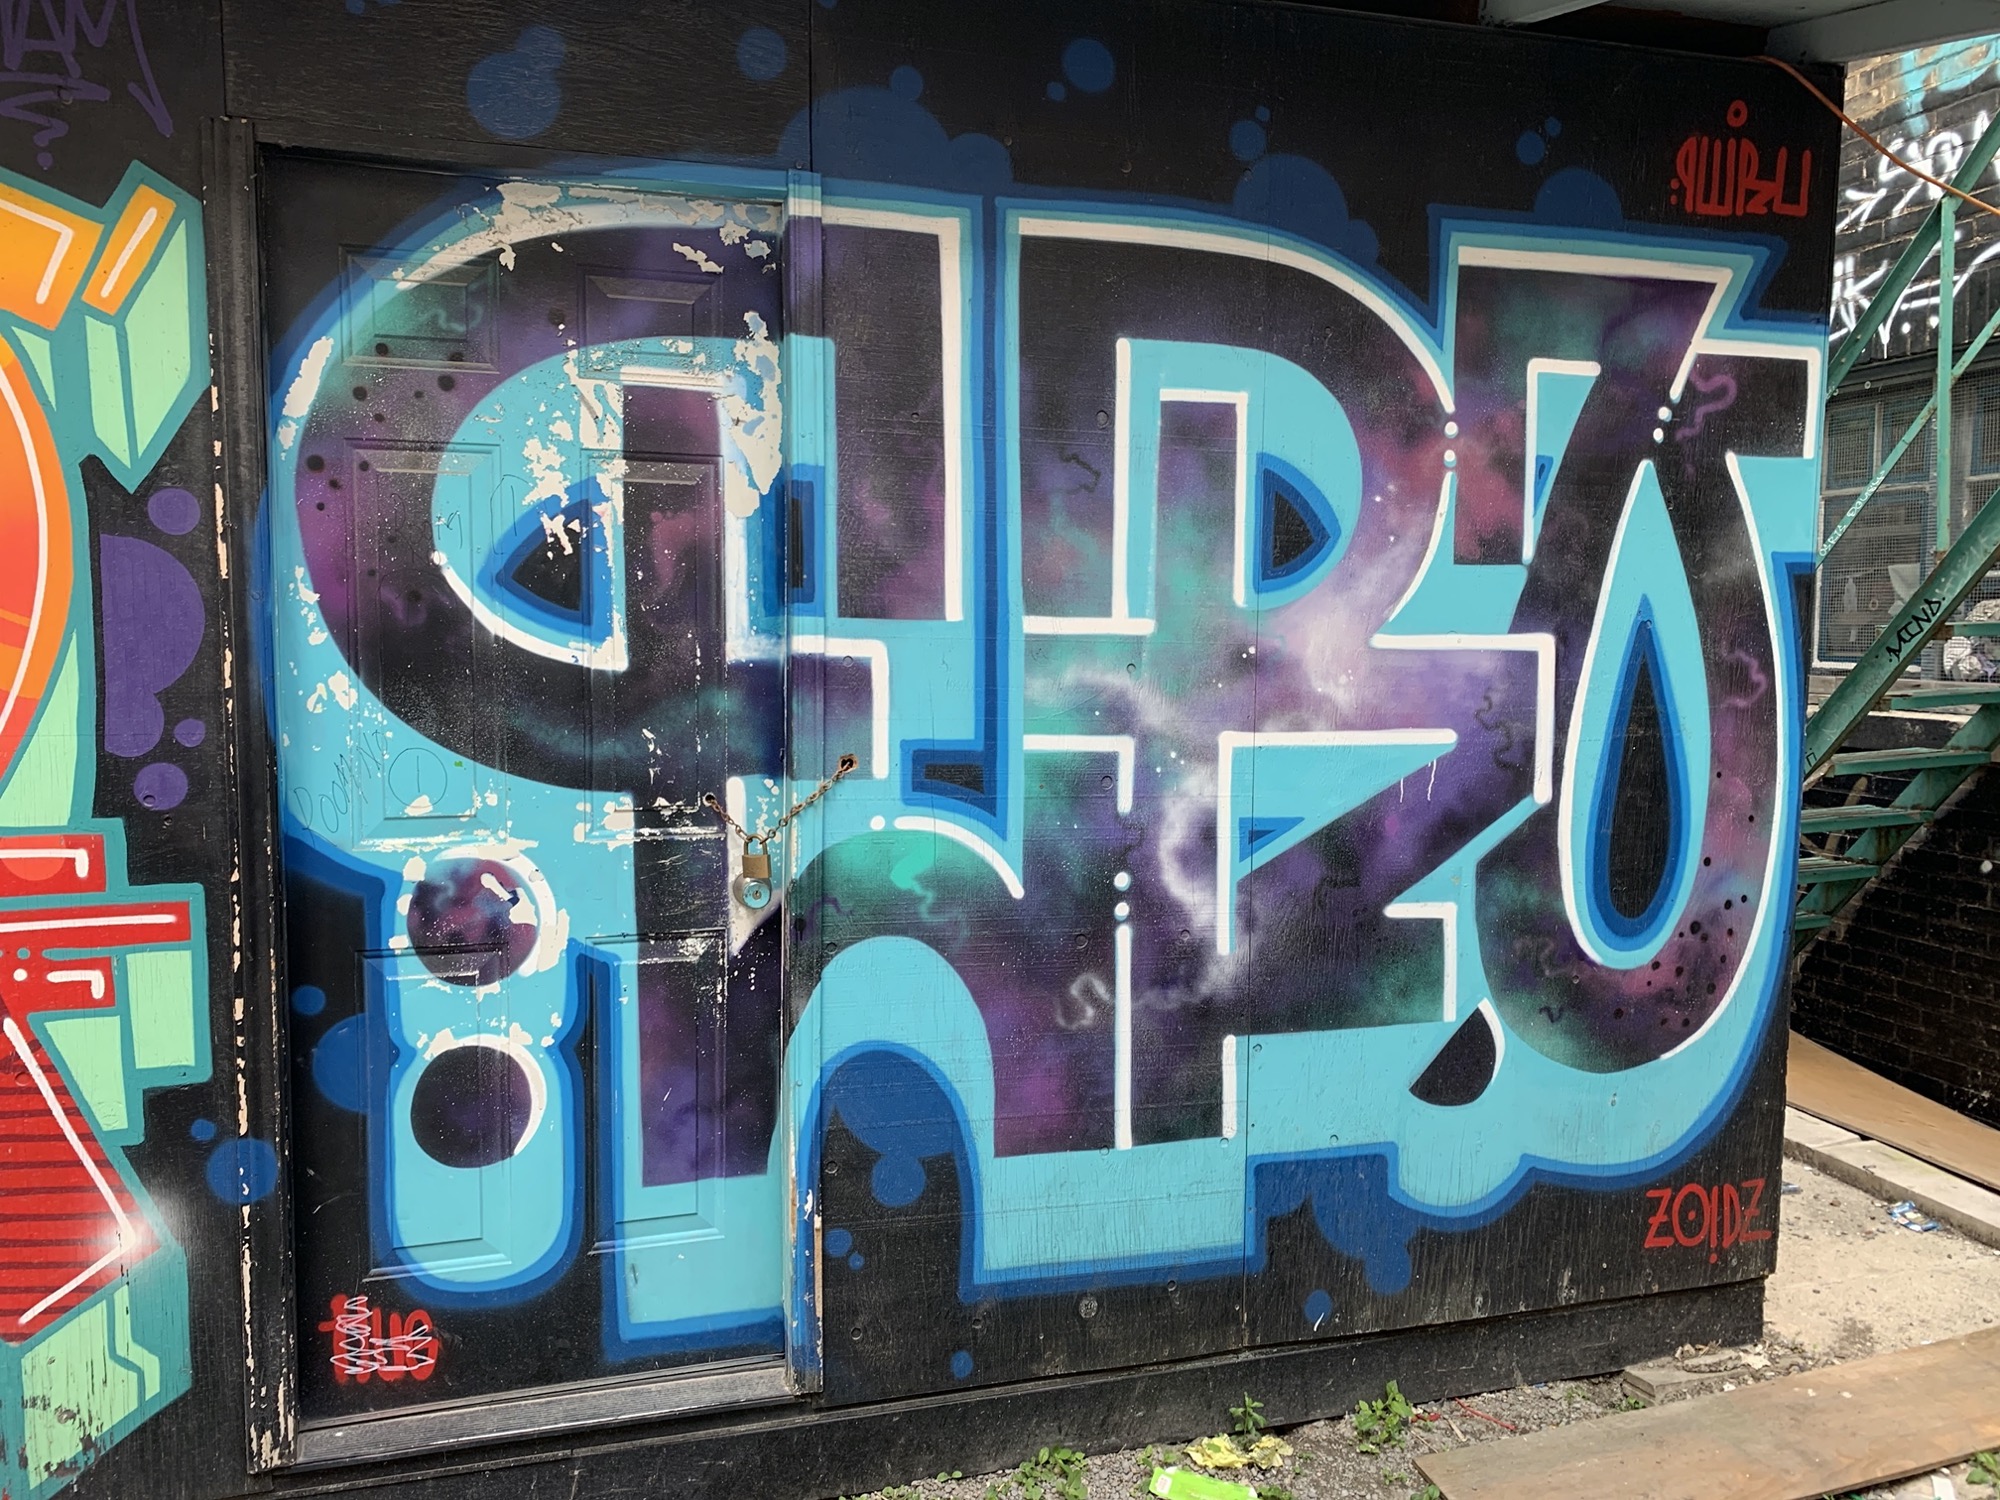 Graffiti 2589  captured by Rabot in Toronto Canada